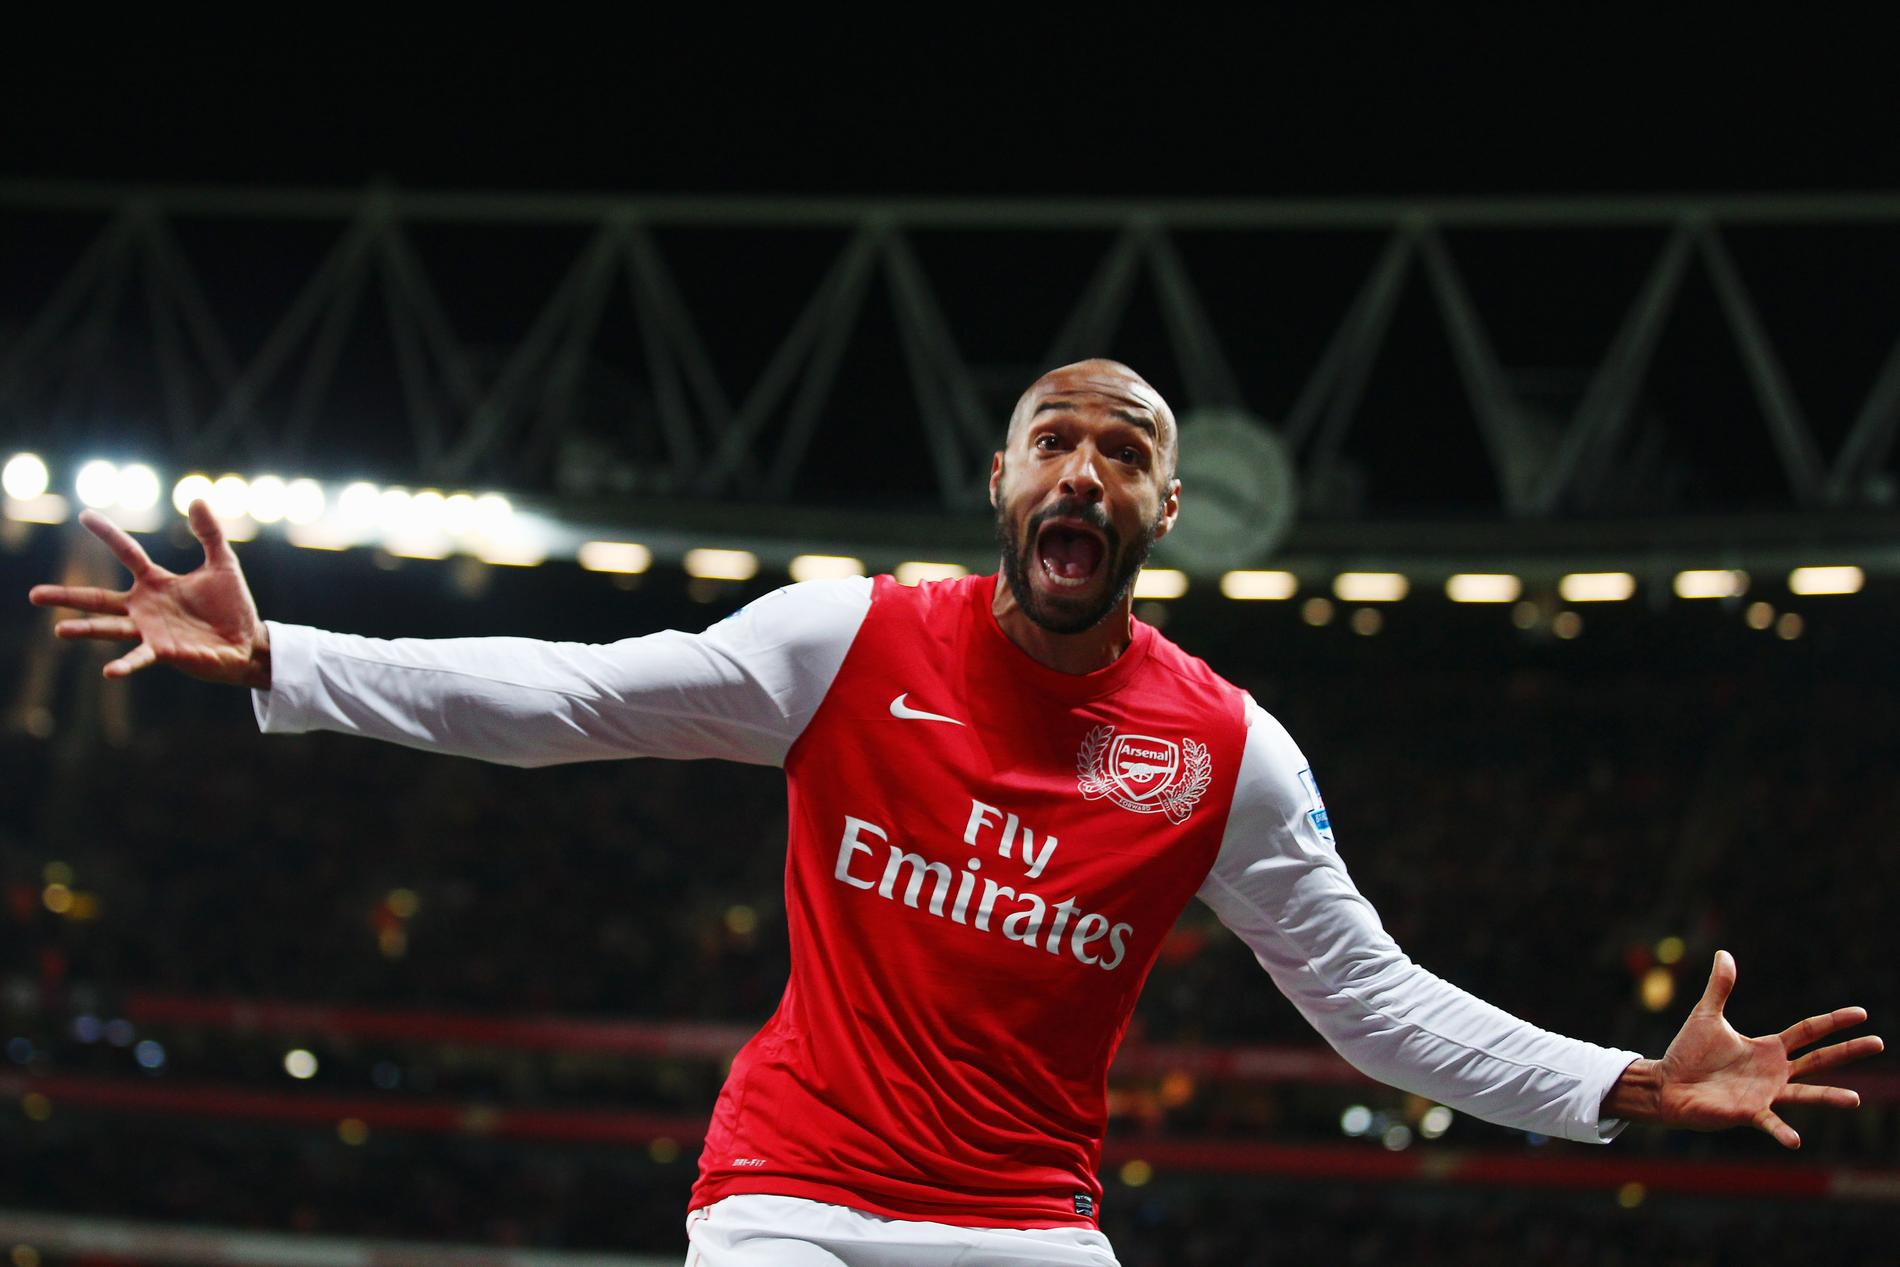 Thierry Henry.